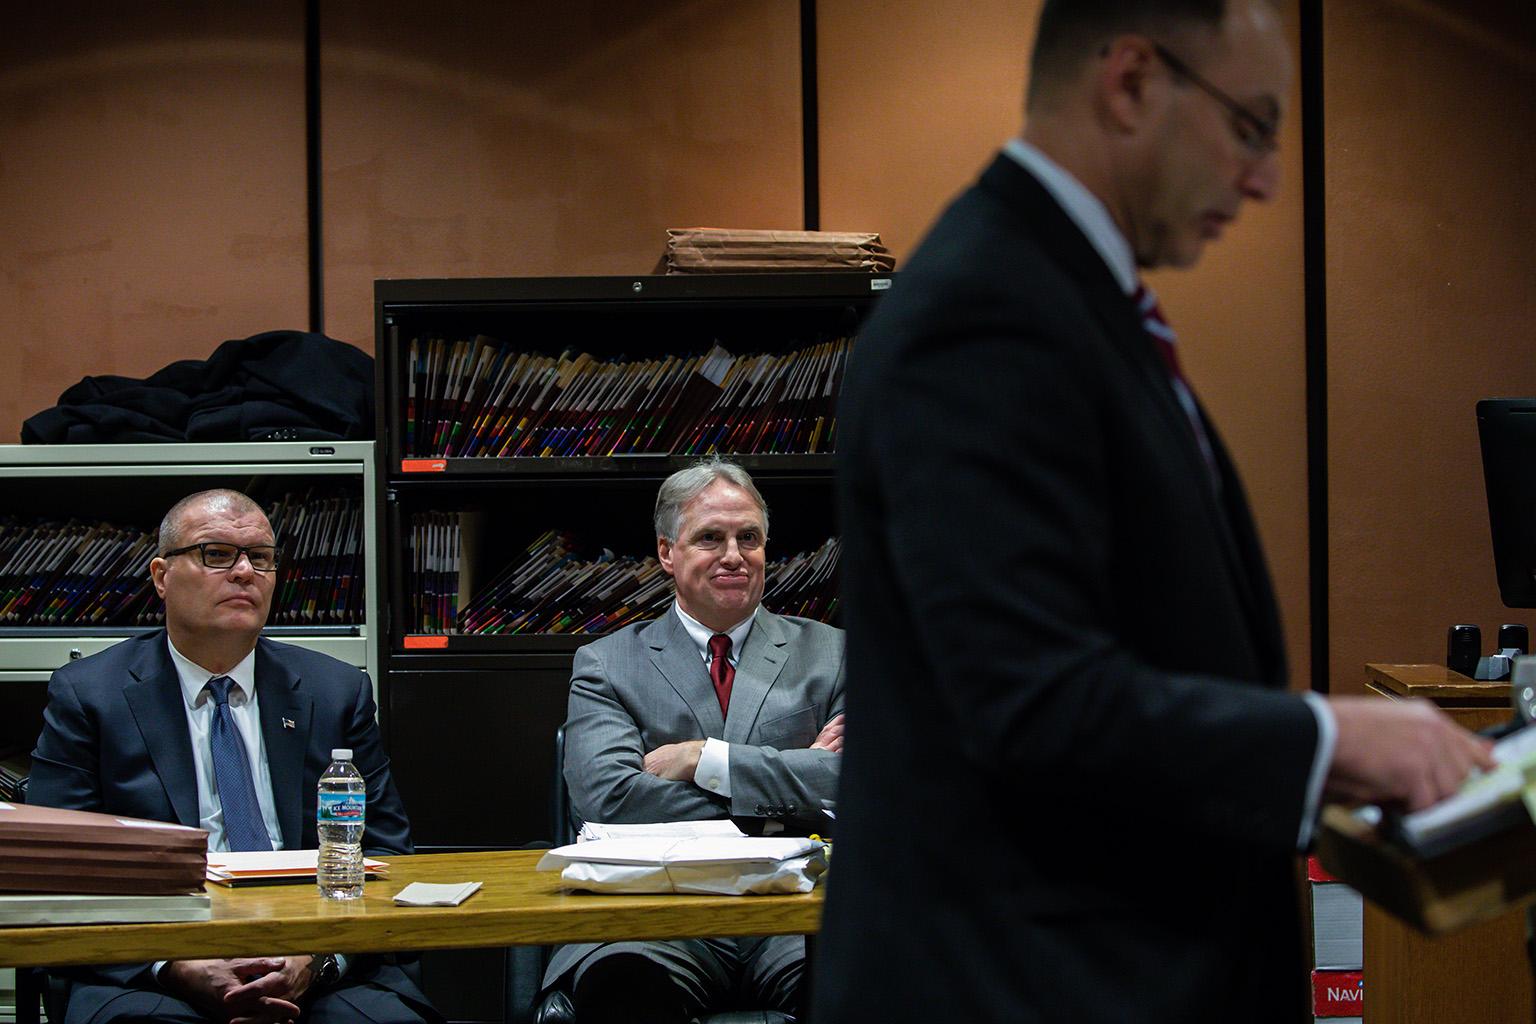 Former Detective David March, left, and his attorney James McKay look on as assistant special prosecutor Ron Safer addresses the court on Thursday, Nov. 29, 2018. (Zbigniew Bzdak / Chicago Tribune / Pool)